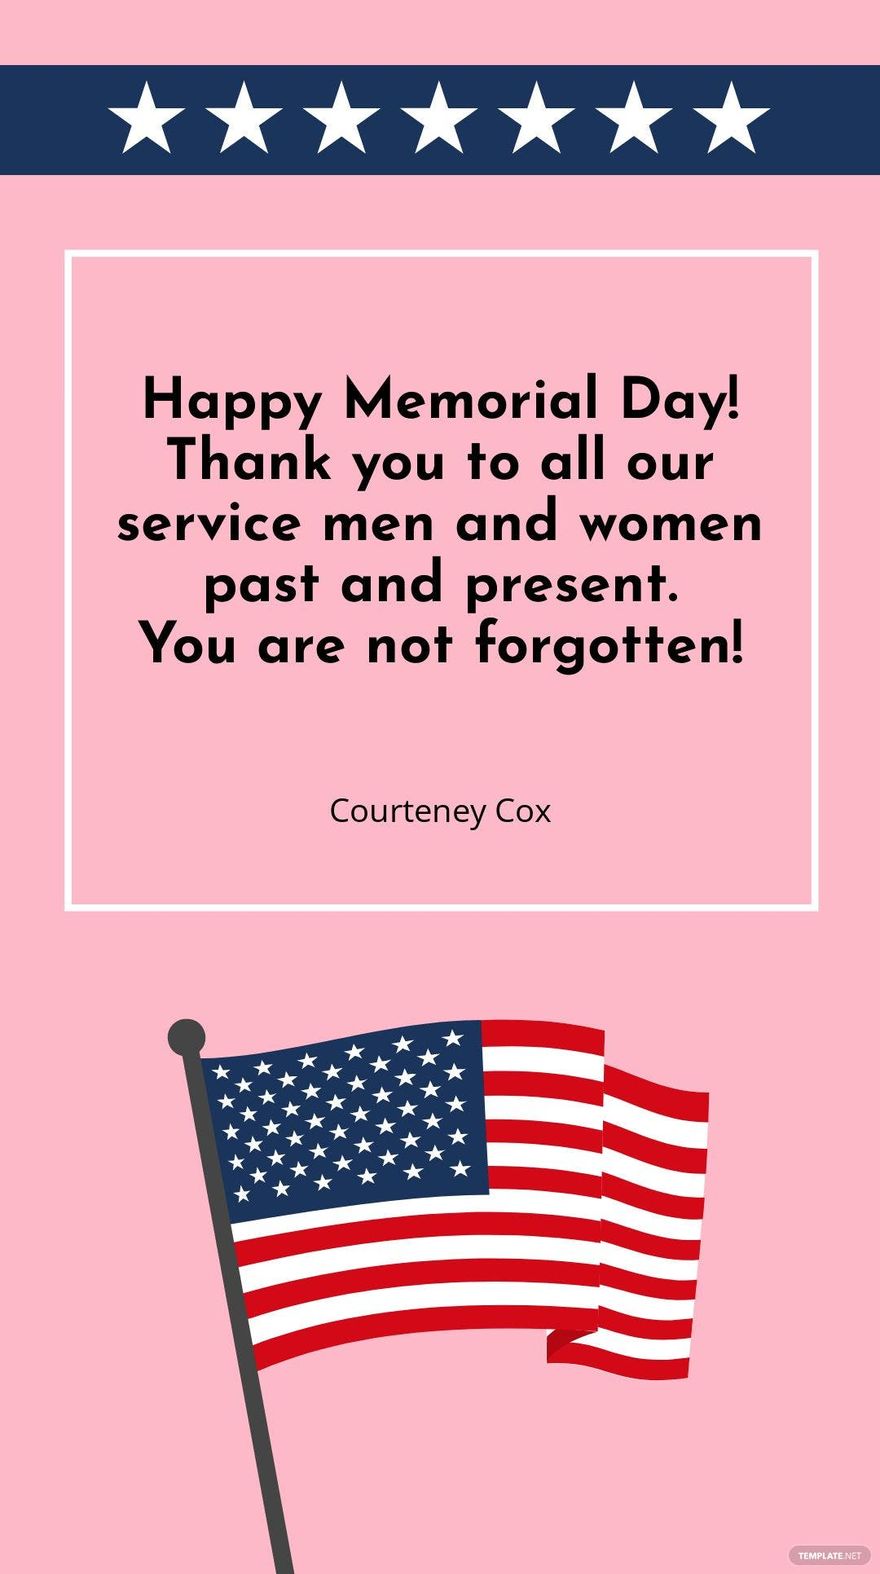 Free Courteney Cox - Happy Memorial Day! Thank you to all our service men and women past and present. You are not forgotten! Template